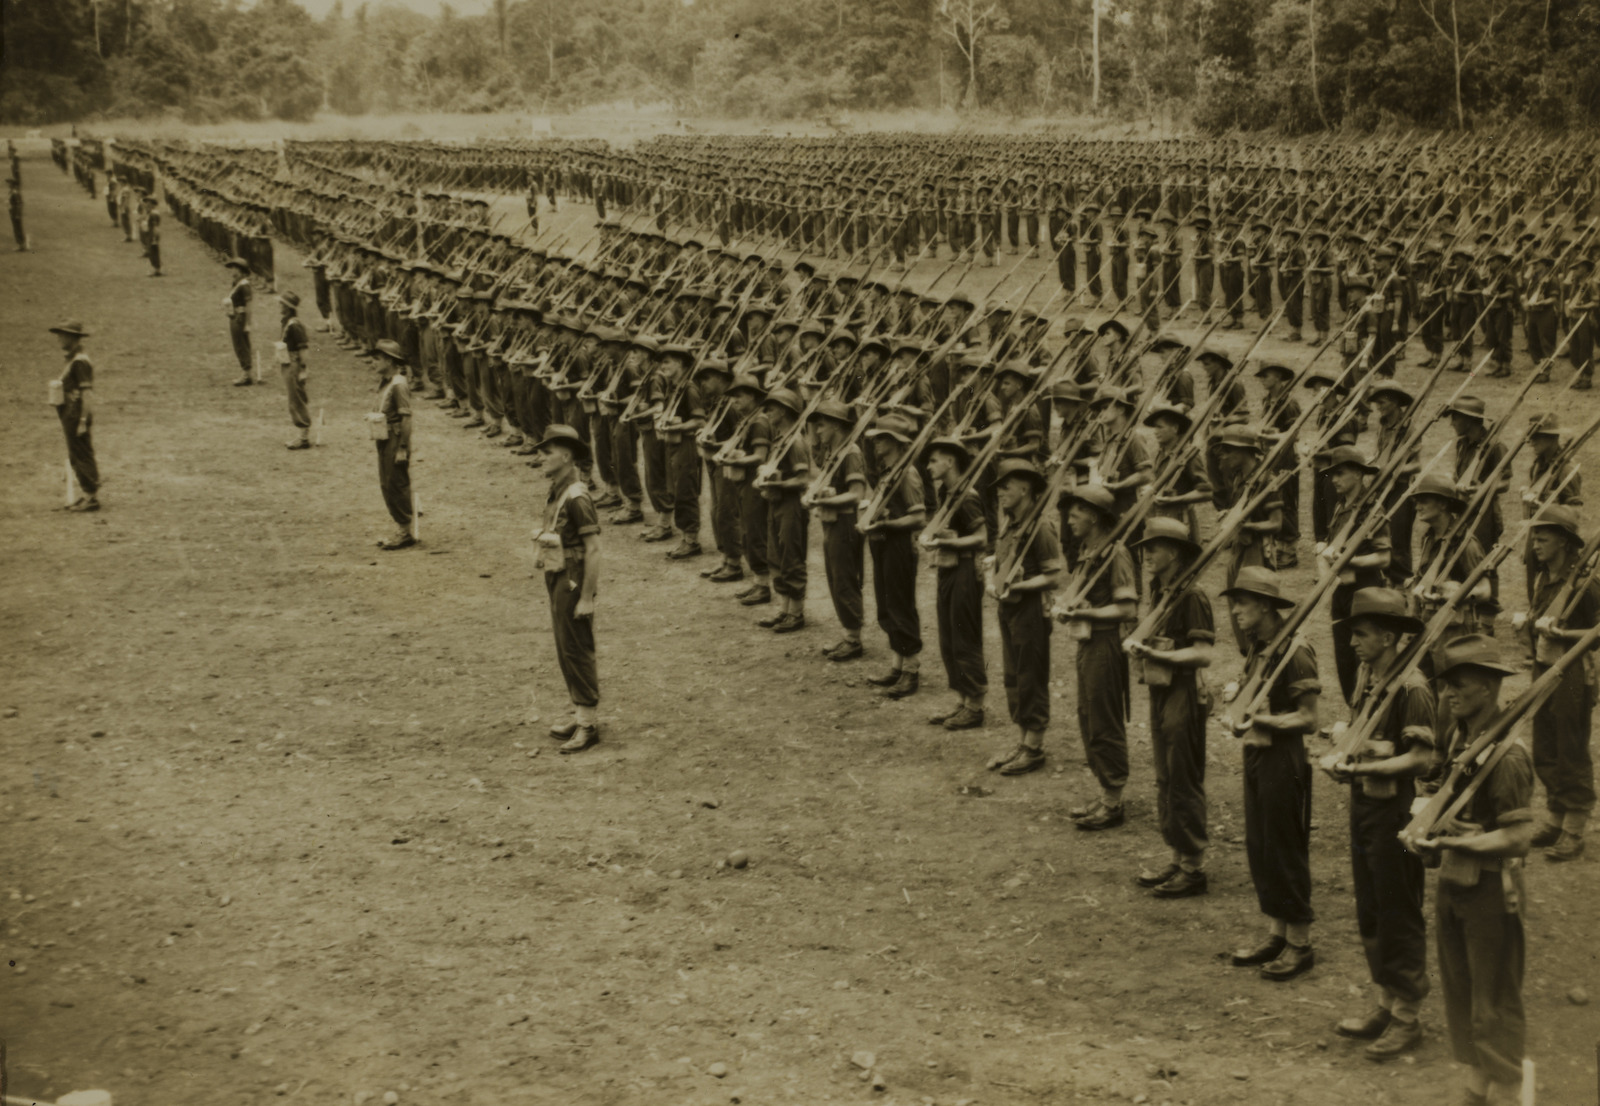 Military parade of Australian soldiers in New Guinea, c. 1943-1944. State Library of Queensland. Public Domain.